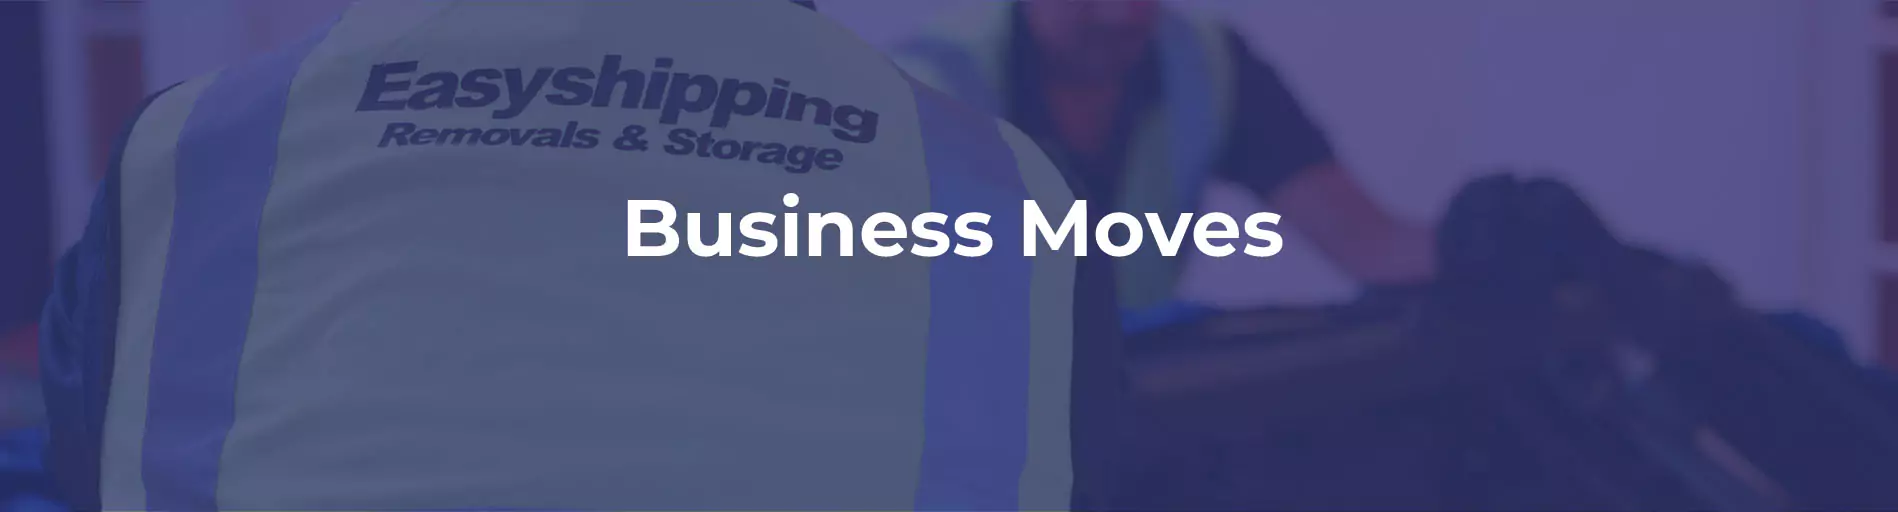 easy shipping business moves service provider